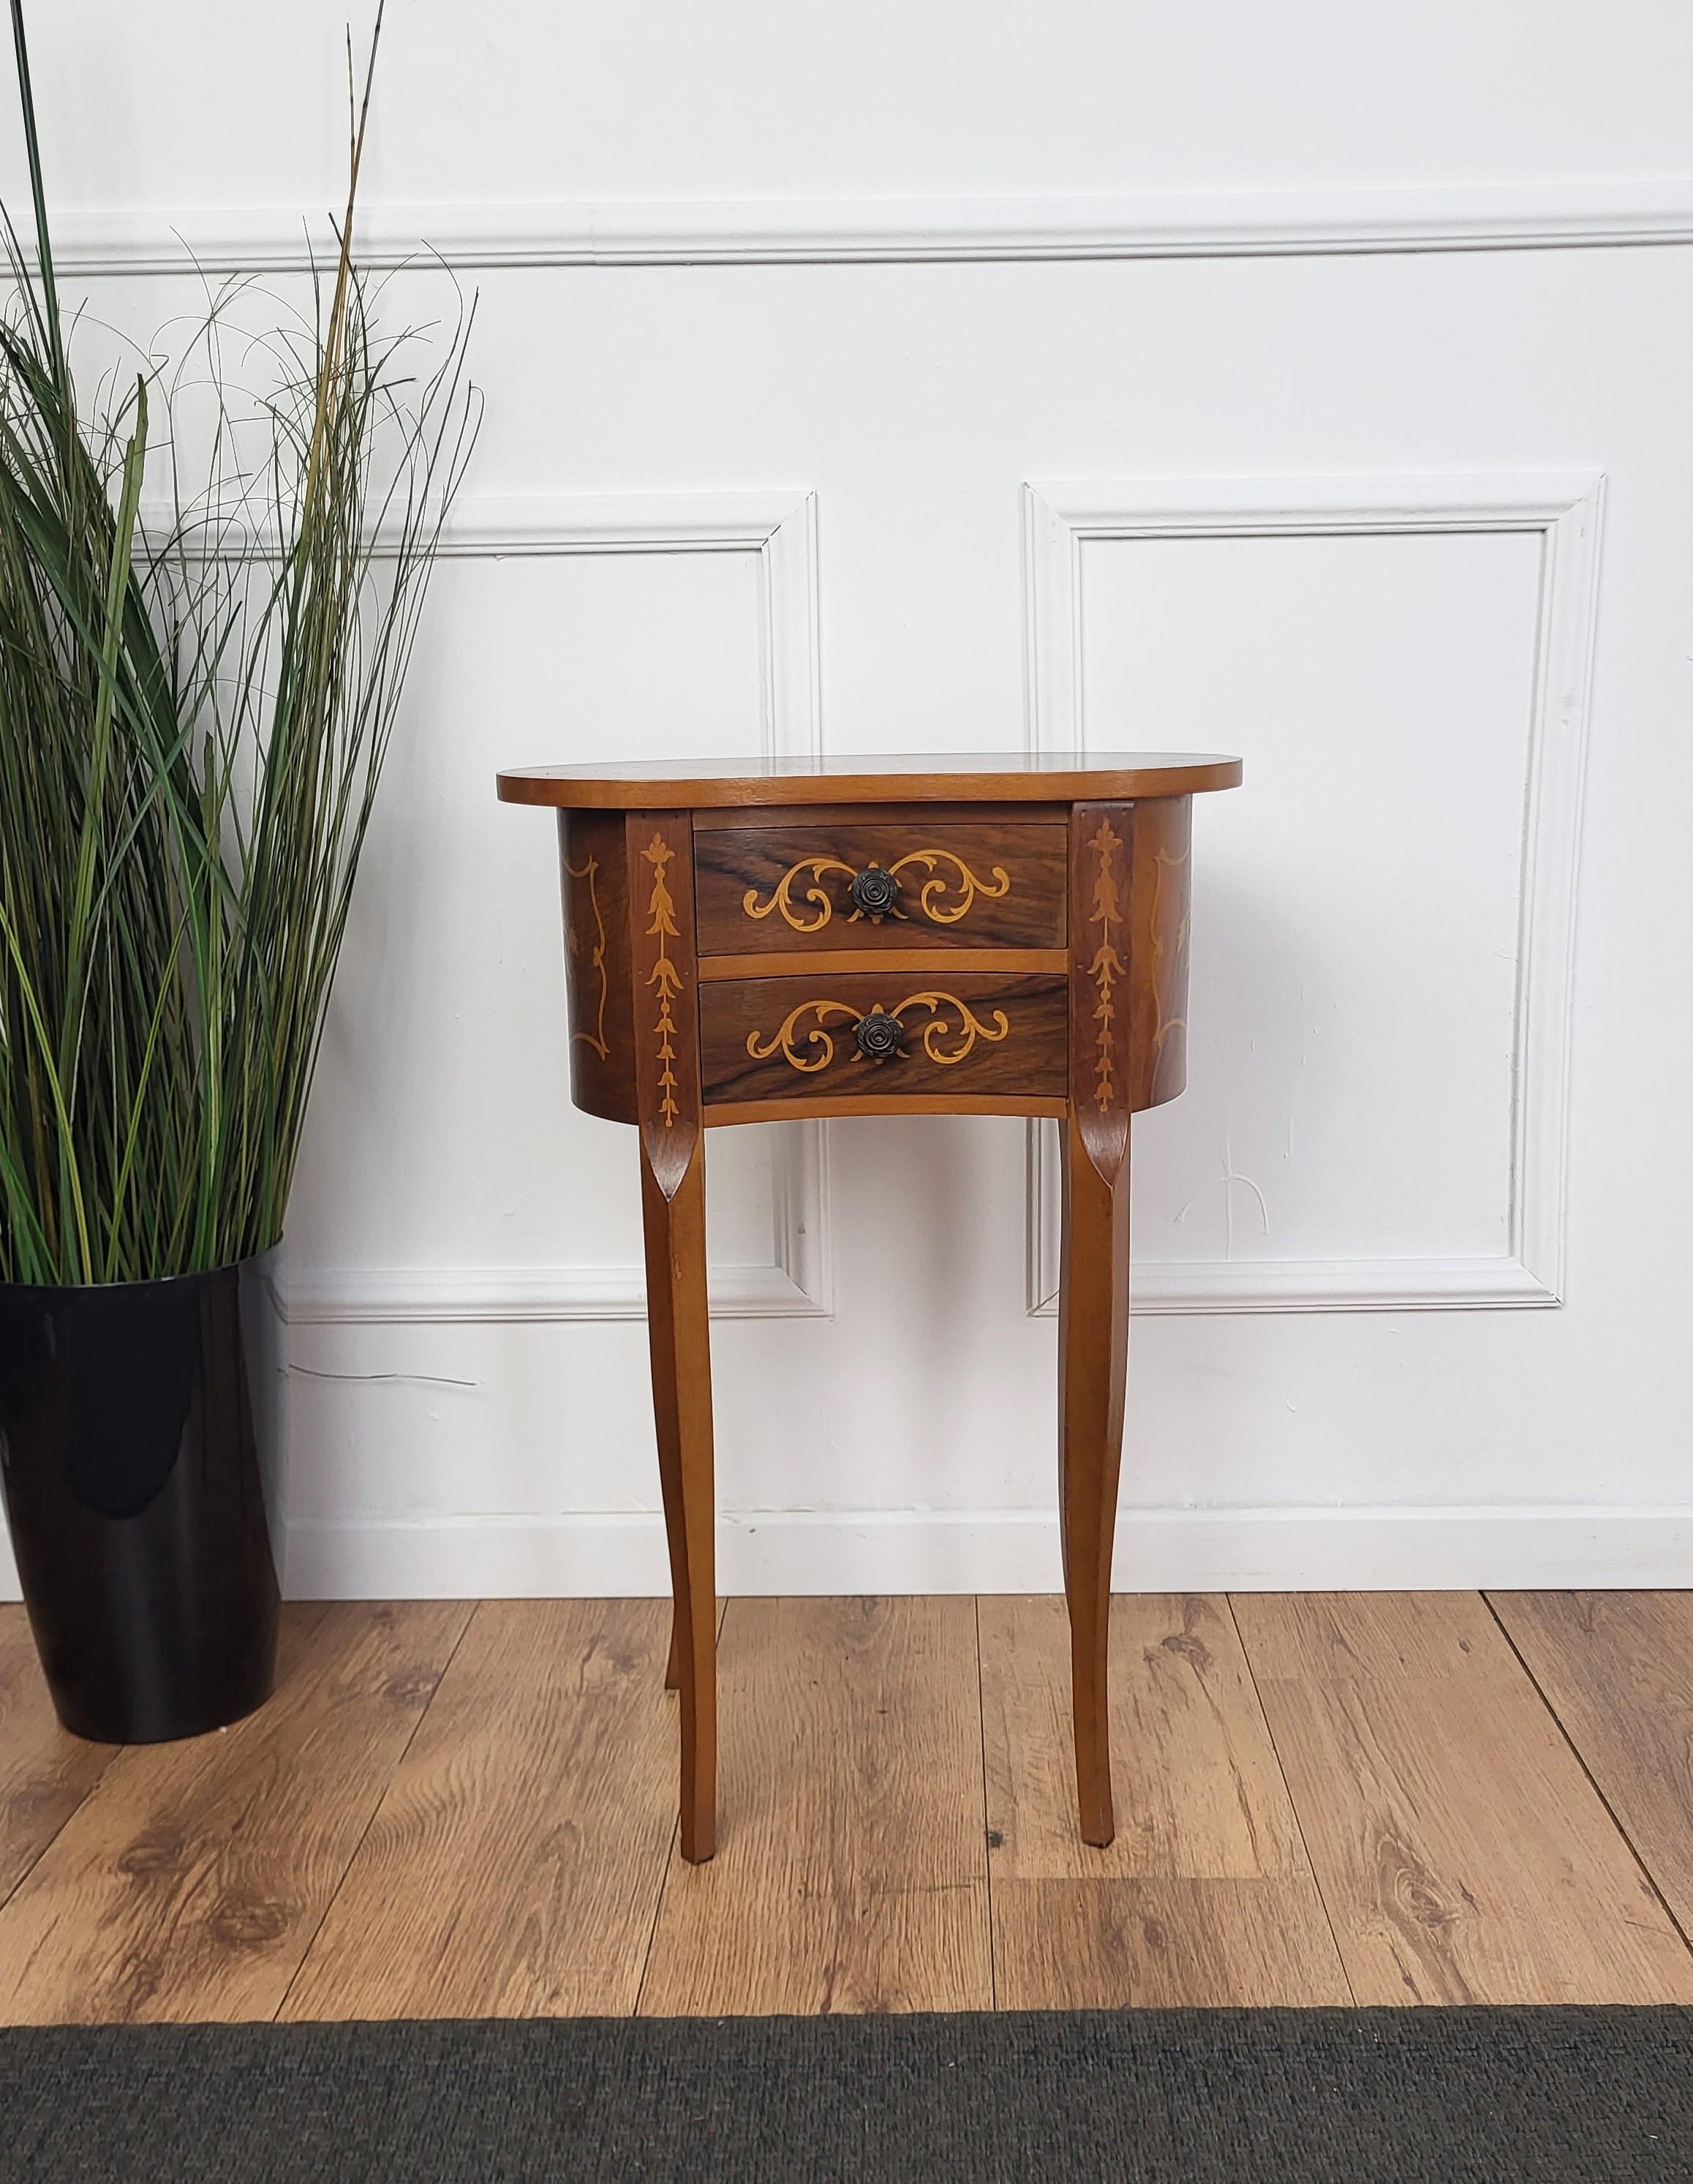 Lovely antique Italian Louis XV floral inlay side table in elegant kidney shaped with inlay decors, floral satinwood inlay, beautiful wood grain, 2 dovetailed drawers, raised on four tall and slender cabriole legs with hoofed feet, typical of the